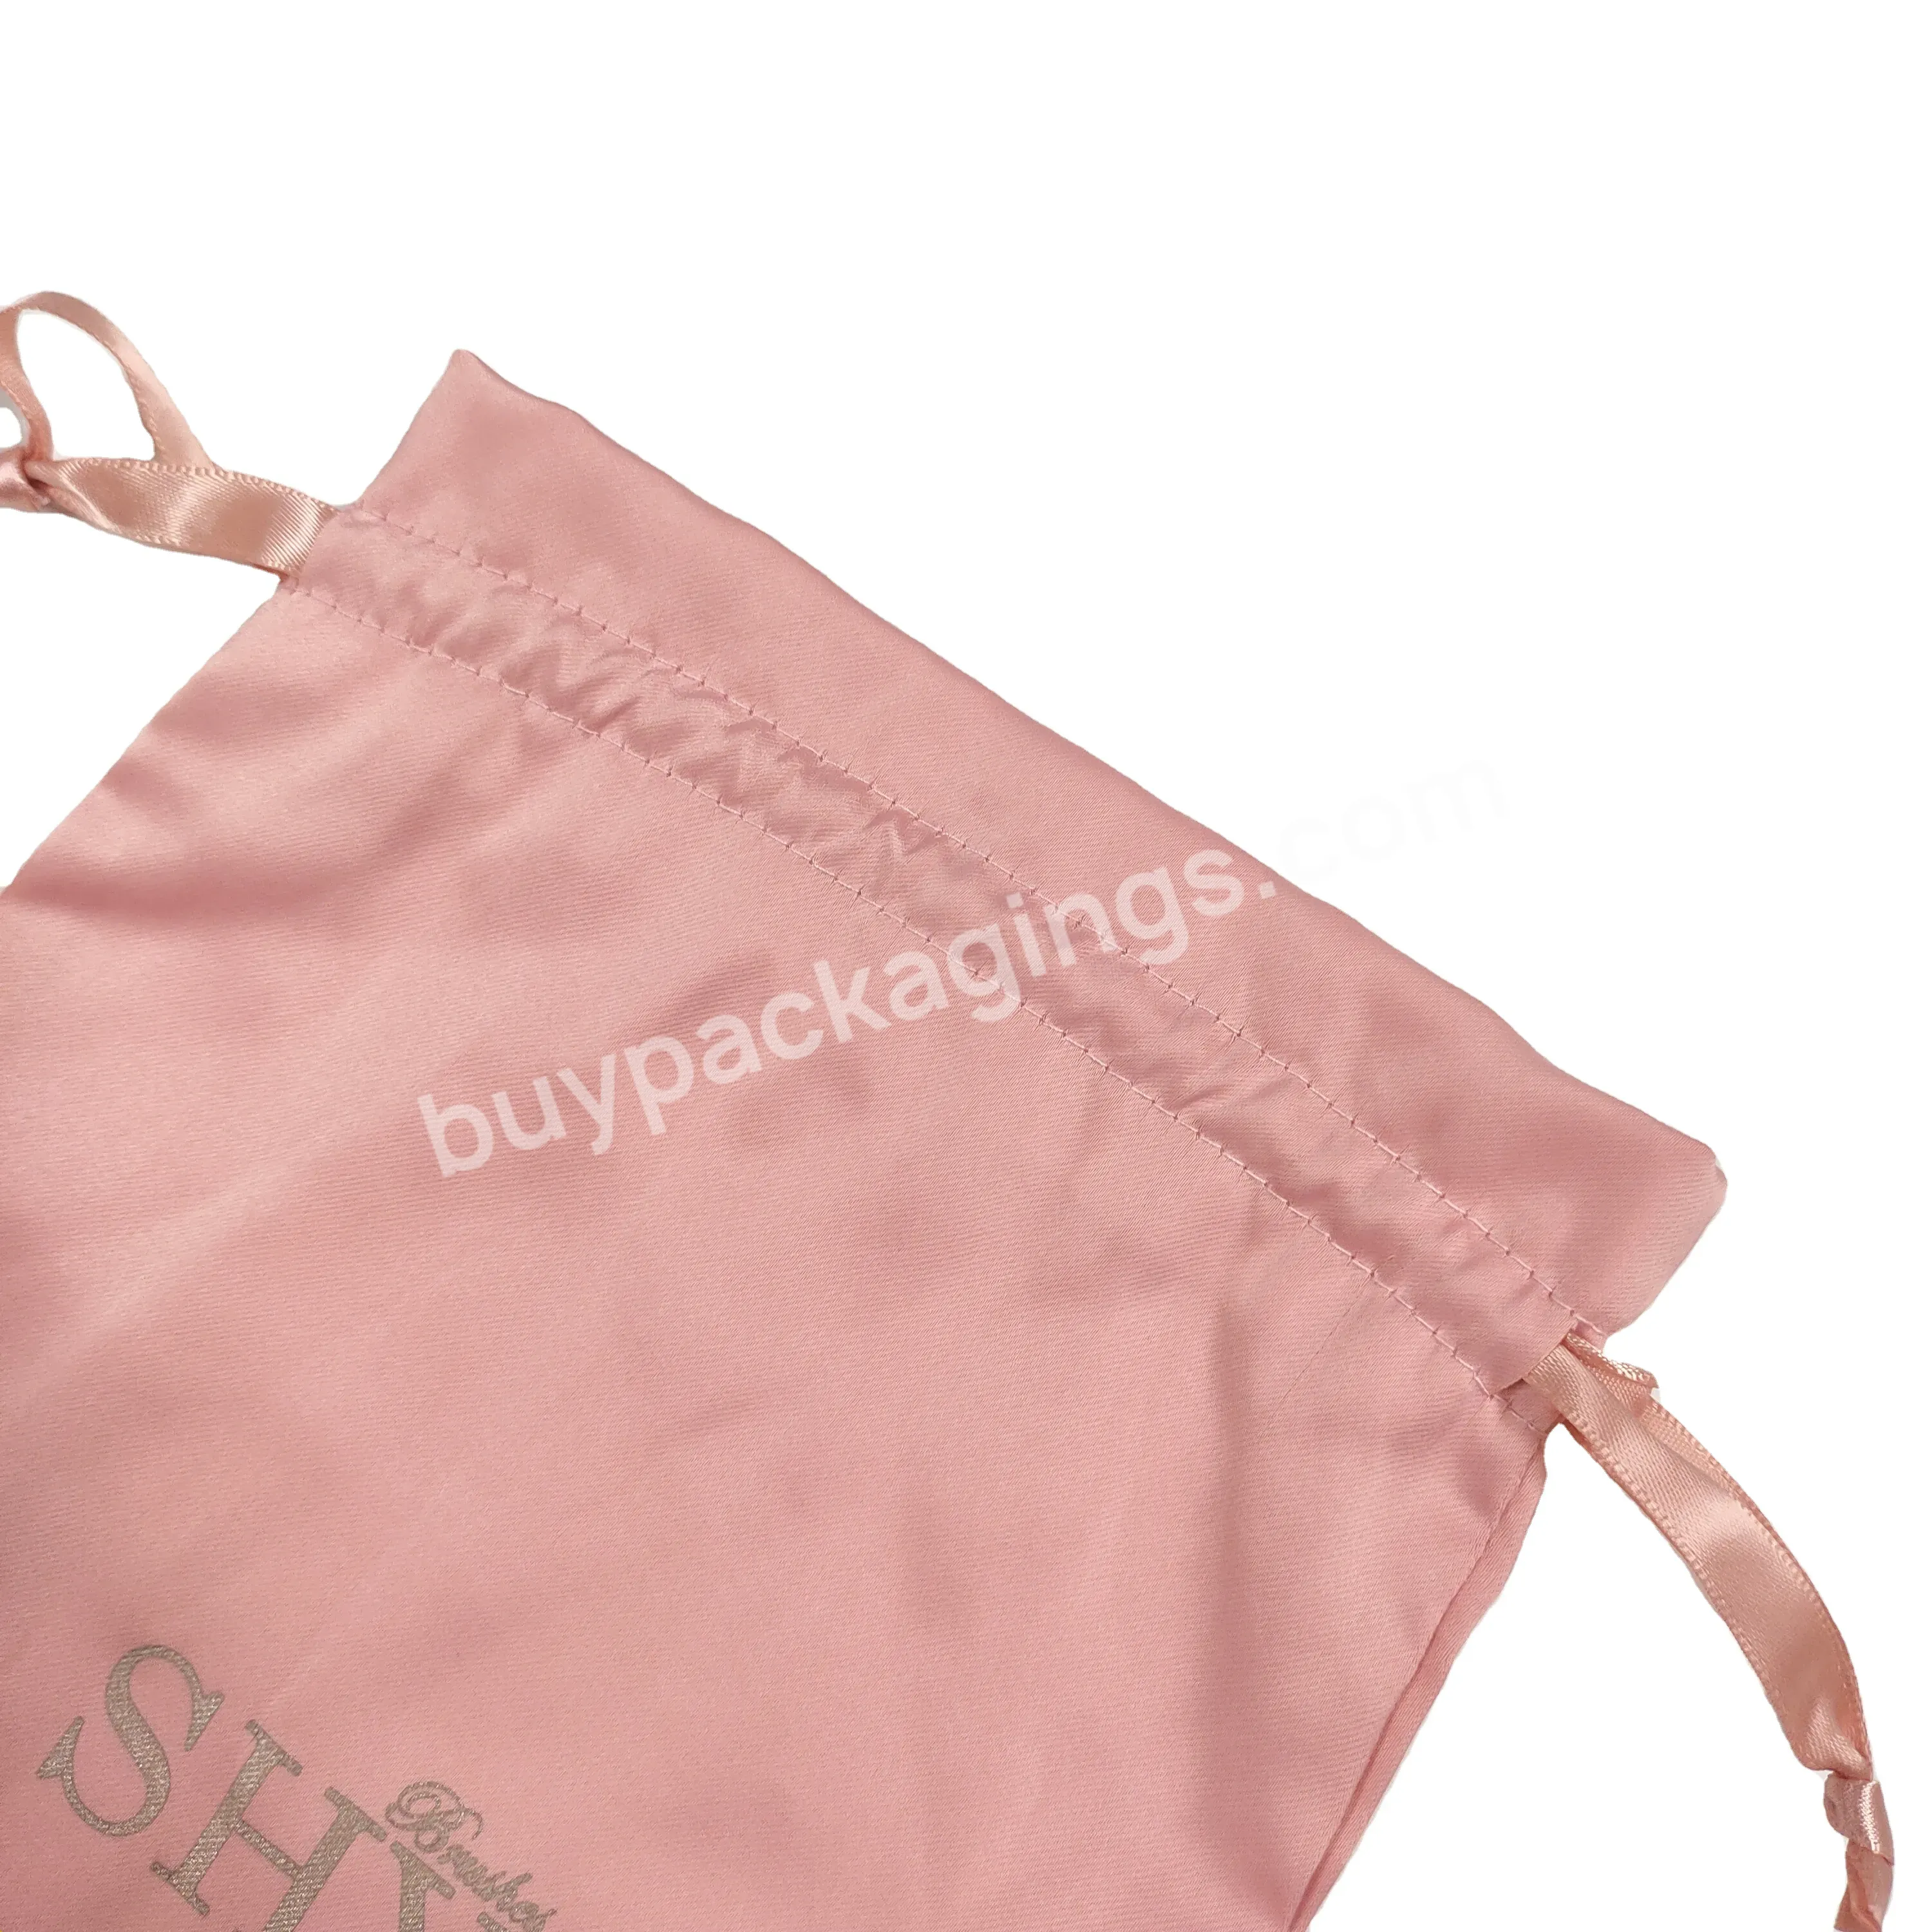 Custom Full Cotton Jewelry Bags With Company Logo Dust Bags - Buy Jewelry Bags,Custom Jewelry Dust Bags,Custom Made Jewelry Bags.